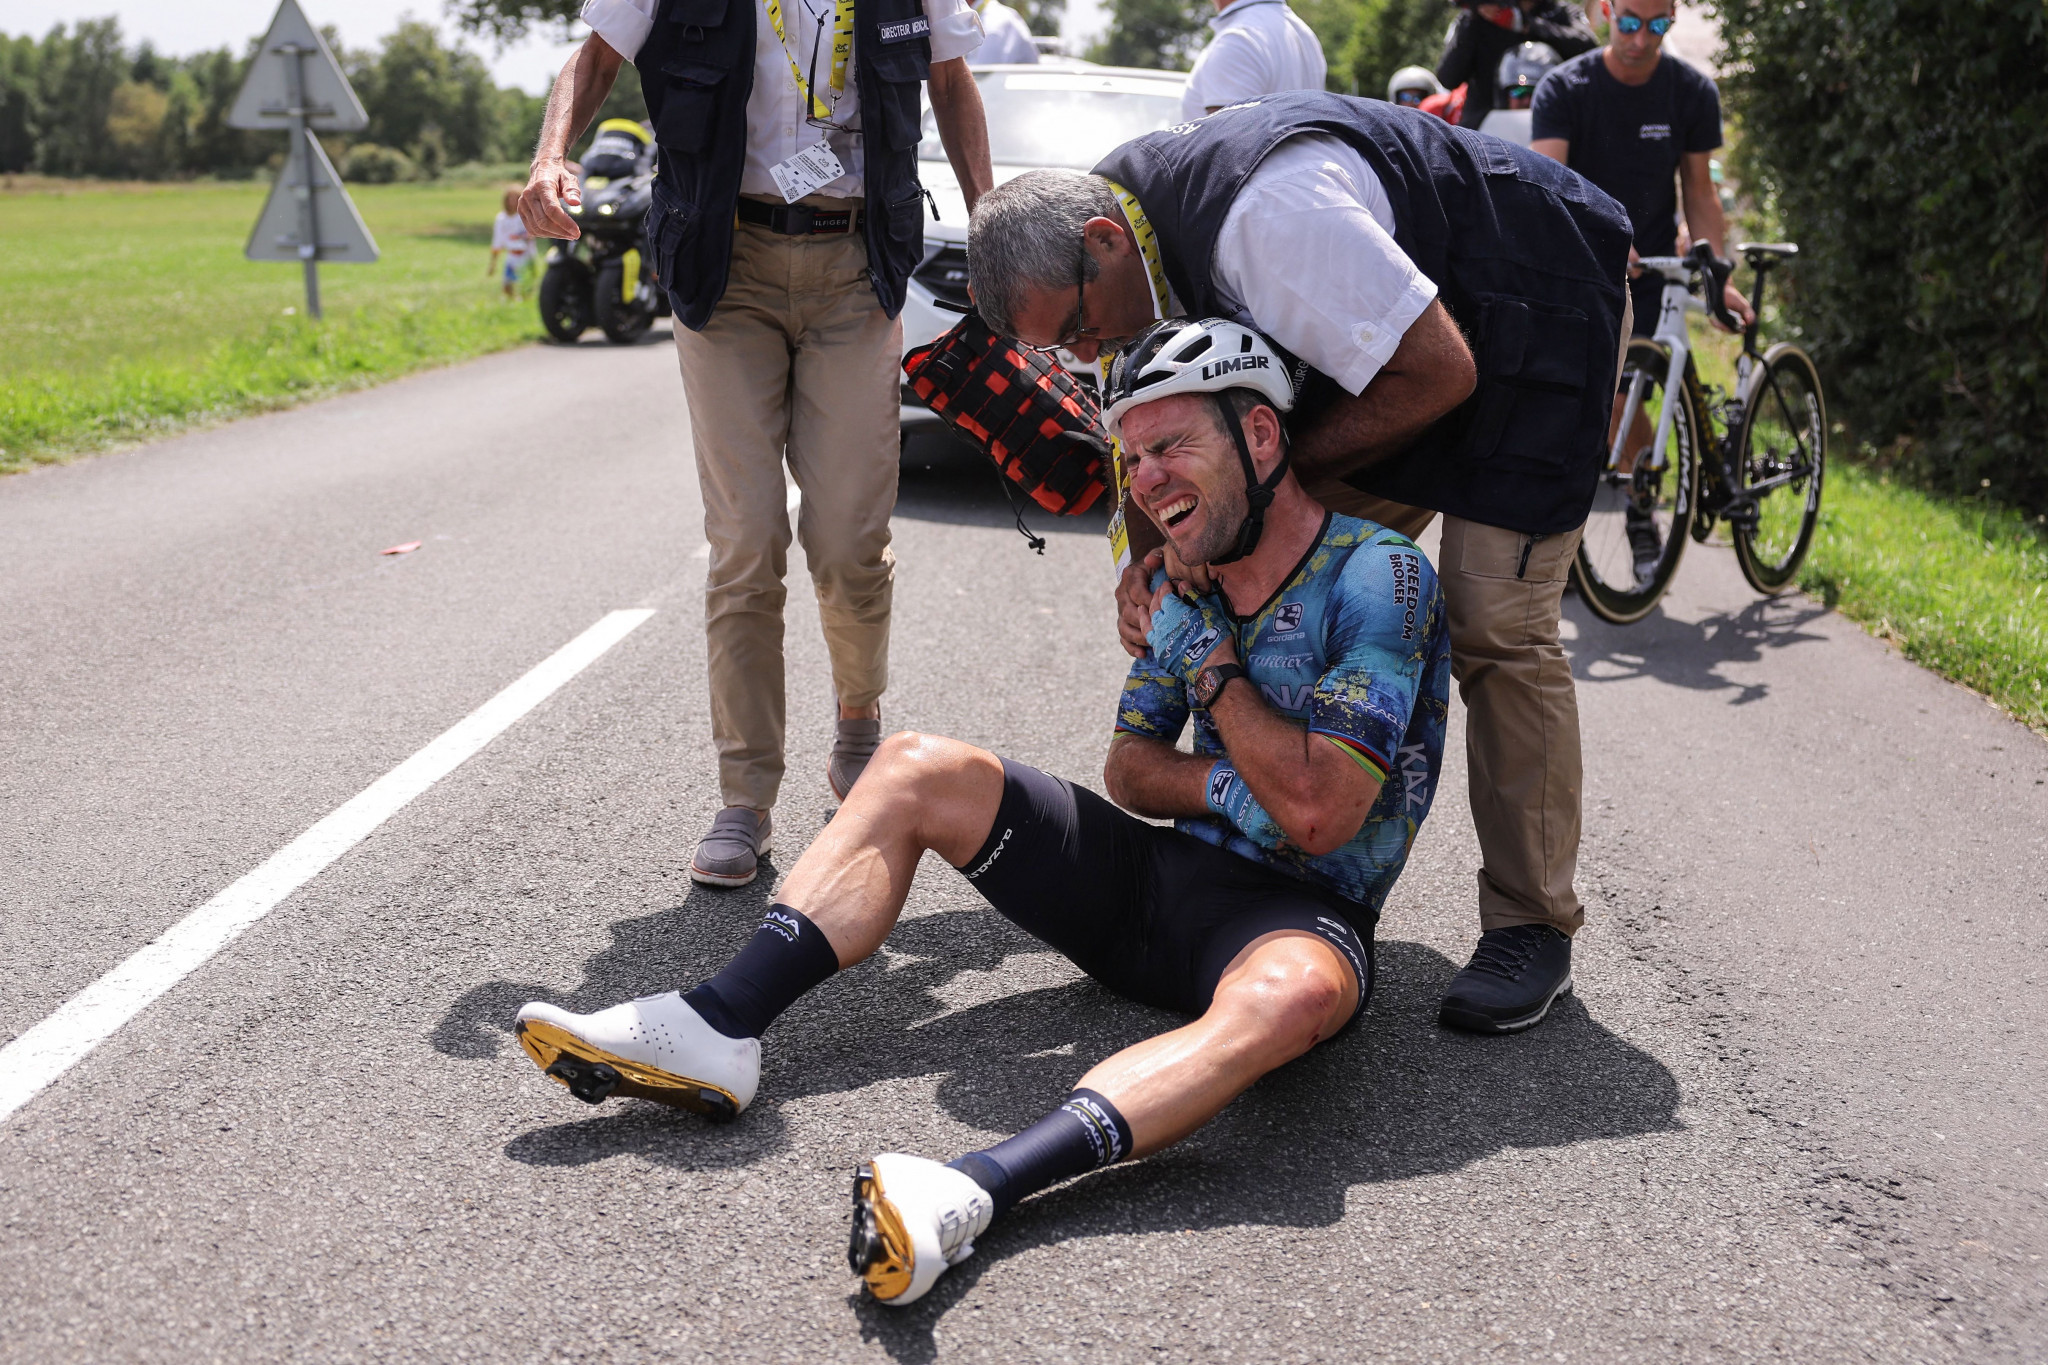 Cavendish crashes out of Tour de France to end record hopes on stage eight won by Pedersen